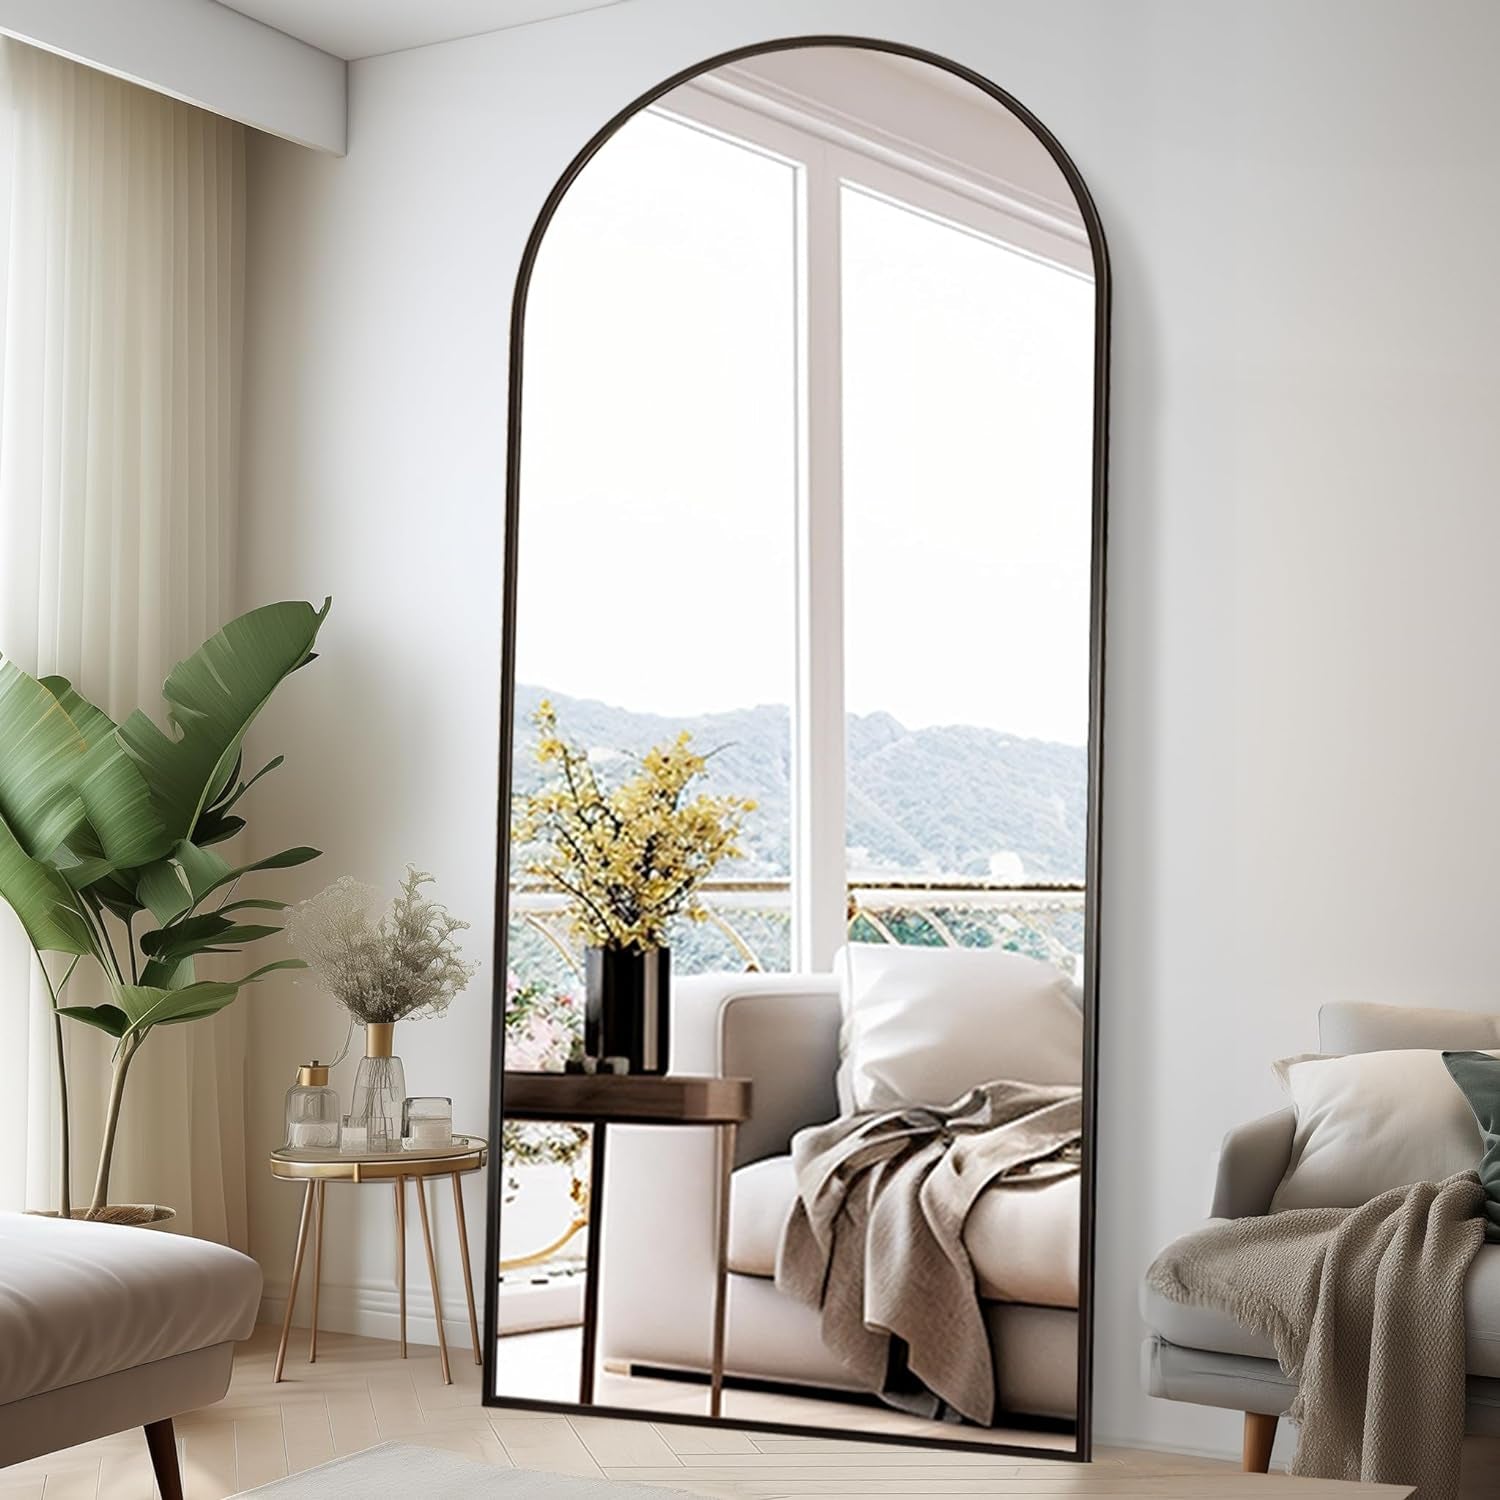 76"X34" Arched Full Length Floor Mirror, Large Mirror Full Length Standing Hanging or Leaning, Big Full Body Mirror Wall Mounted Mirror for Bedroom Living Room, Black - Design By Technique